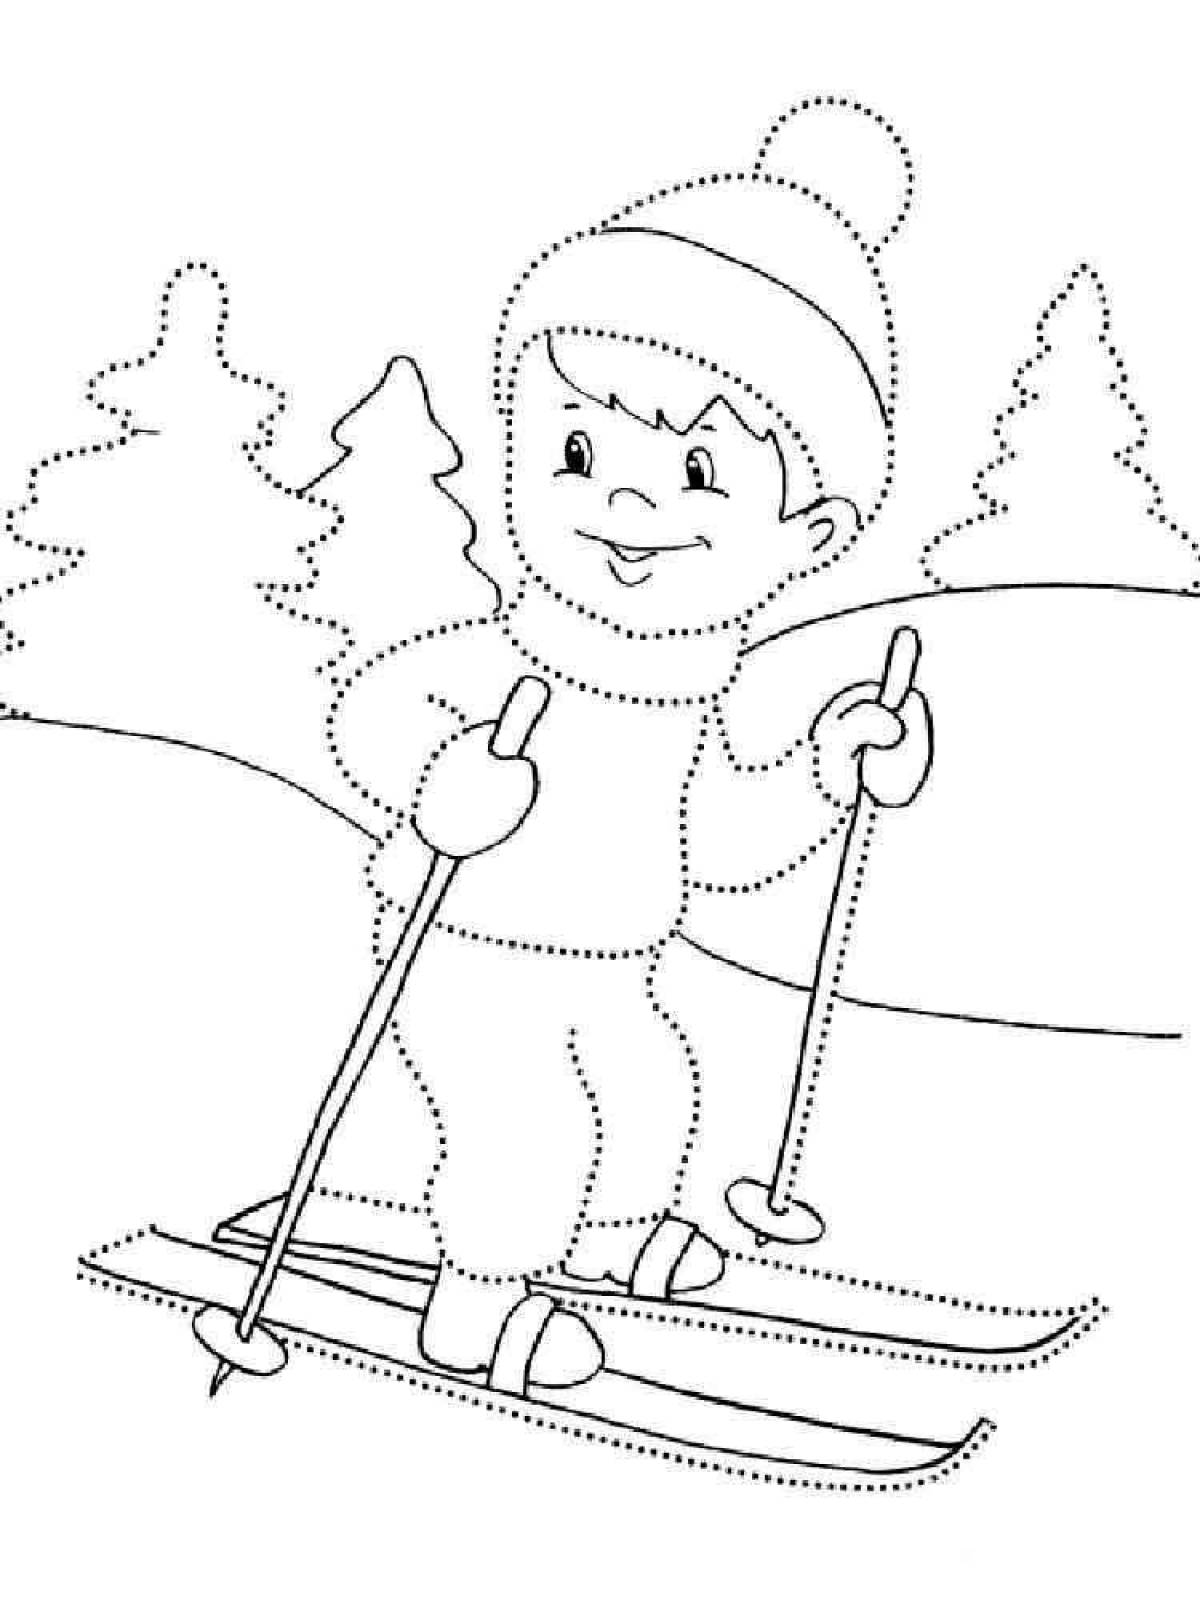 Zealth skier coloring page